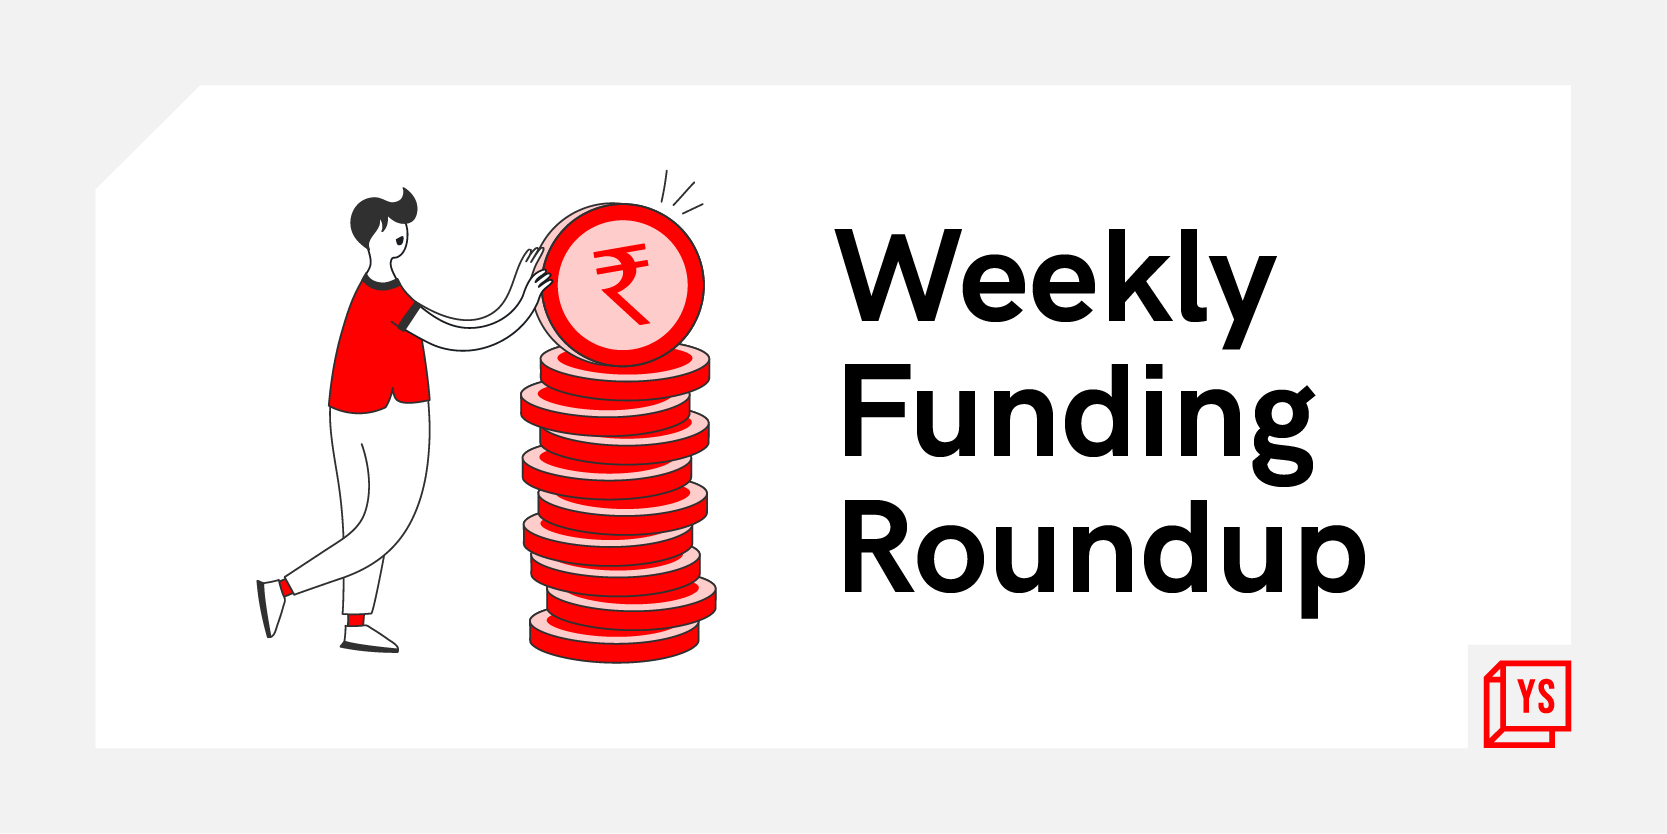 [Weekly funding roundup May 2-6] Steep rise in venture investments